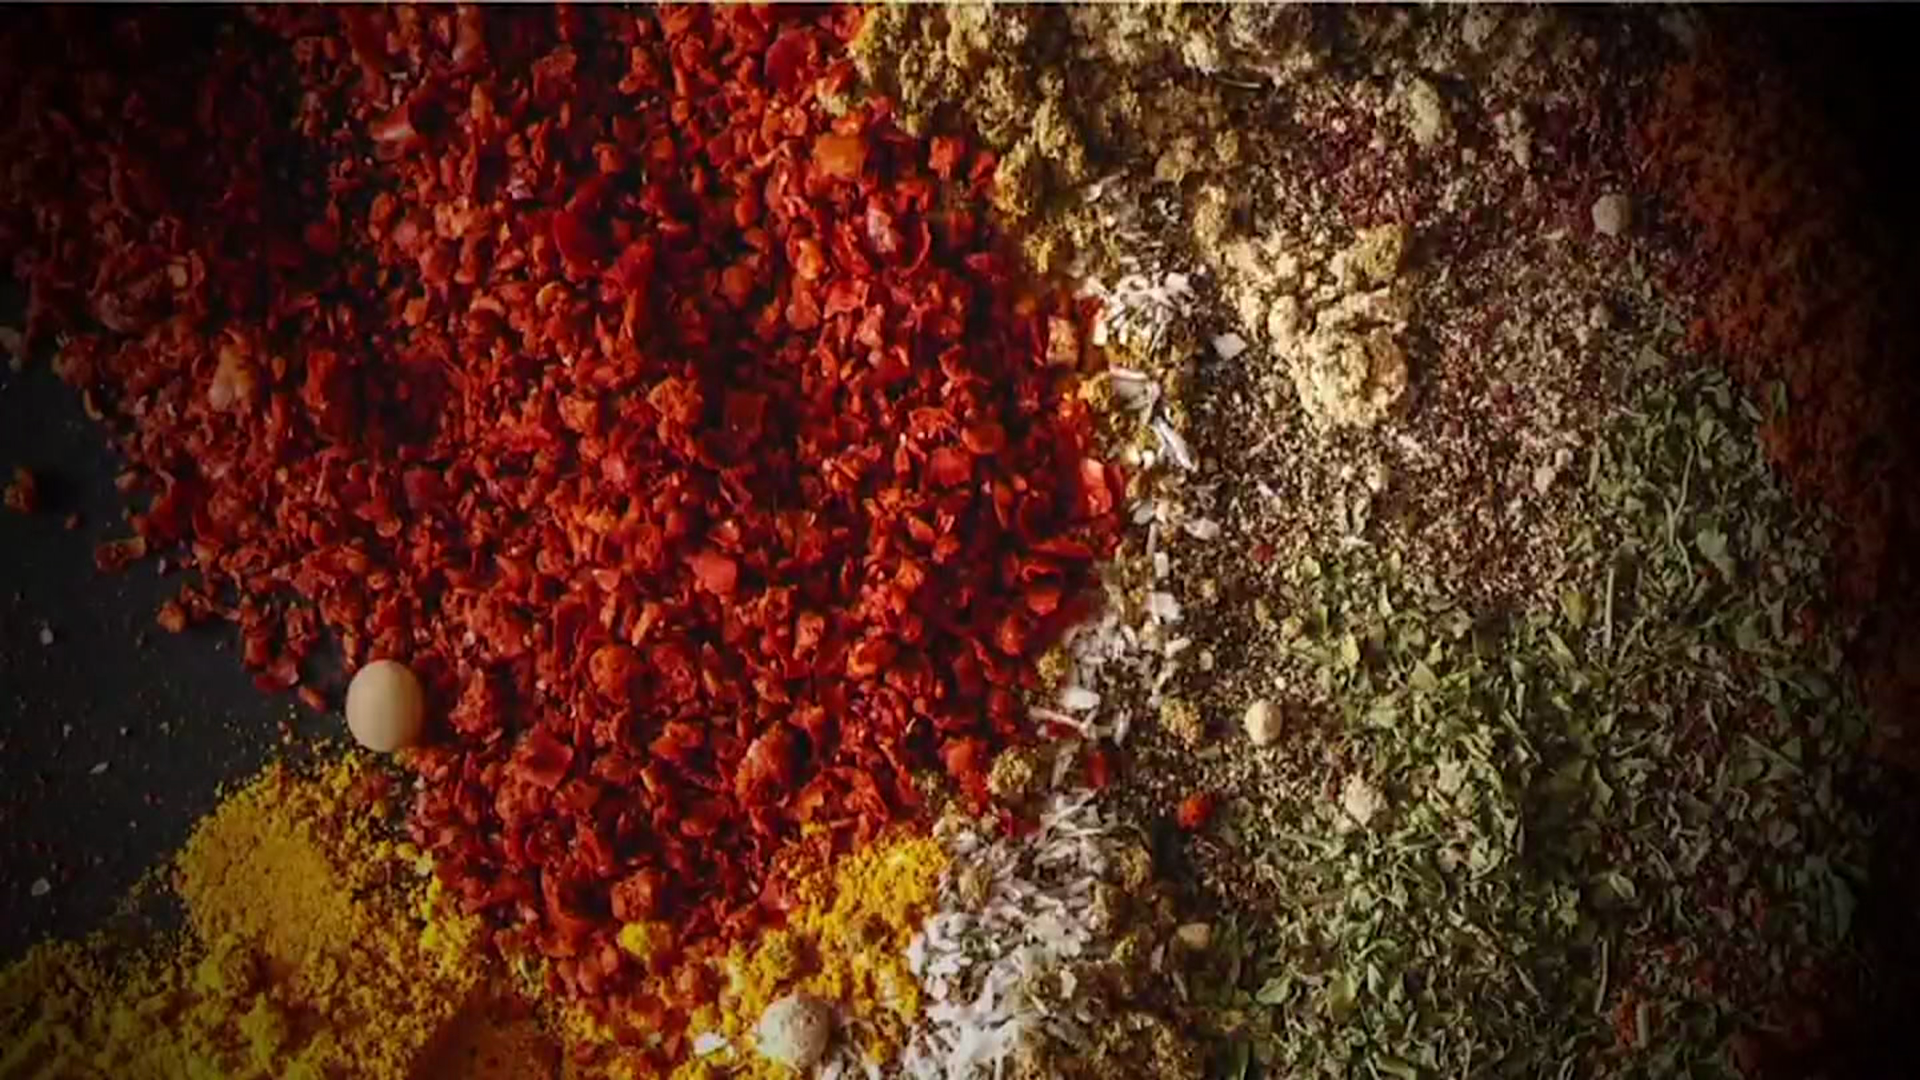 https://media.nbcdfw.com/2021/11/cr-spices-1.png?fit=1920%2C1080&quality=85&strip=all